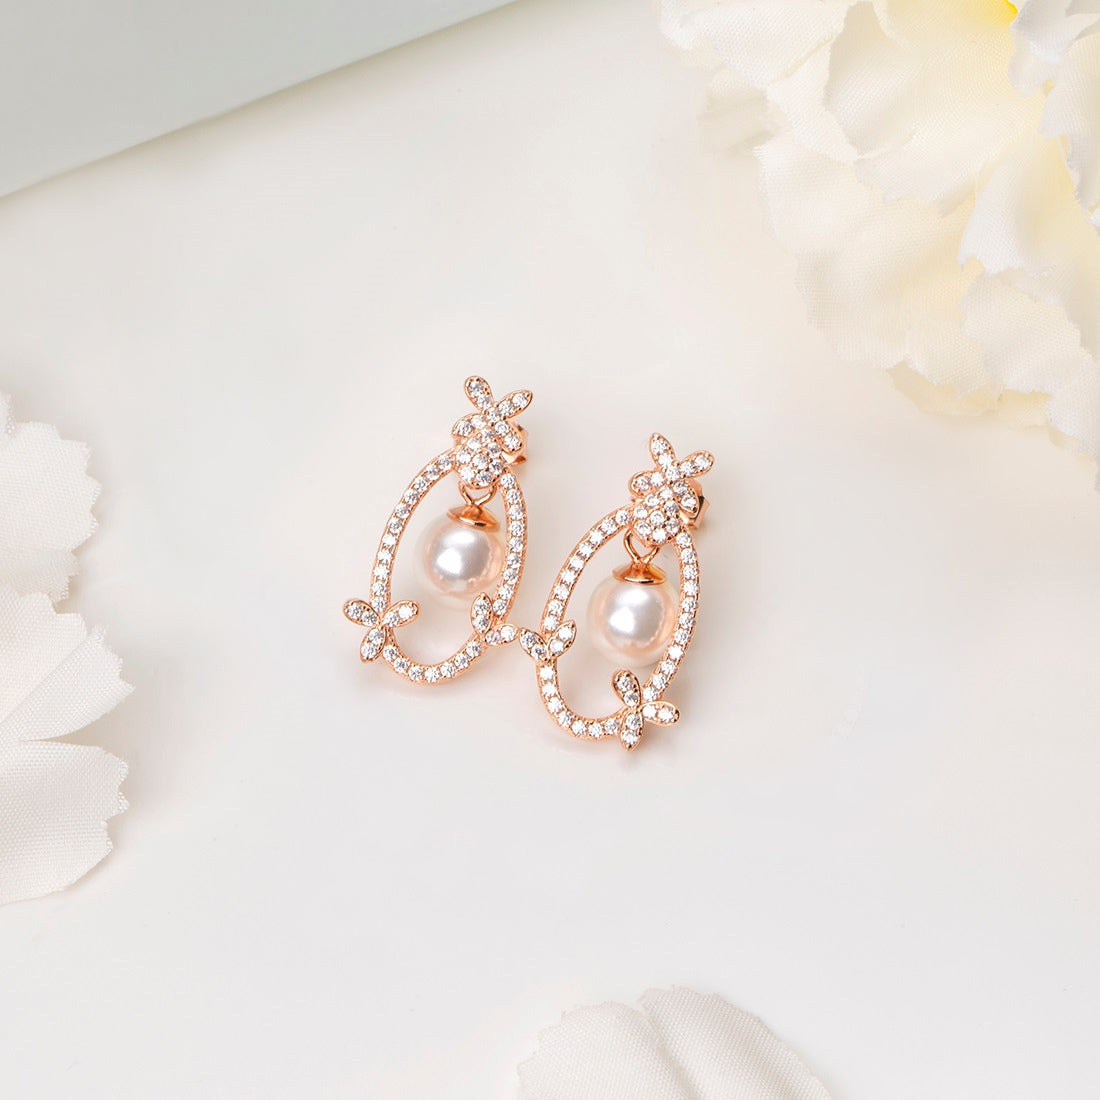 Blooming CZ & Pearl 925 Sterling Silver Rose Gold-Plated Earrings